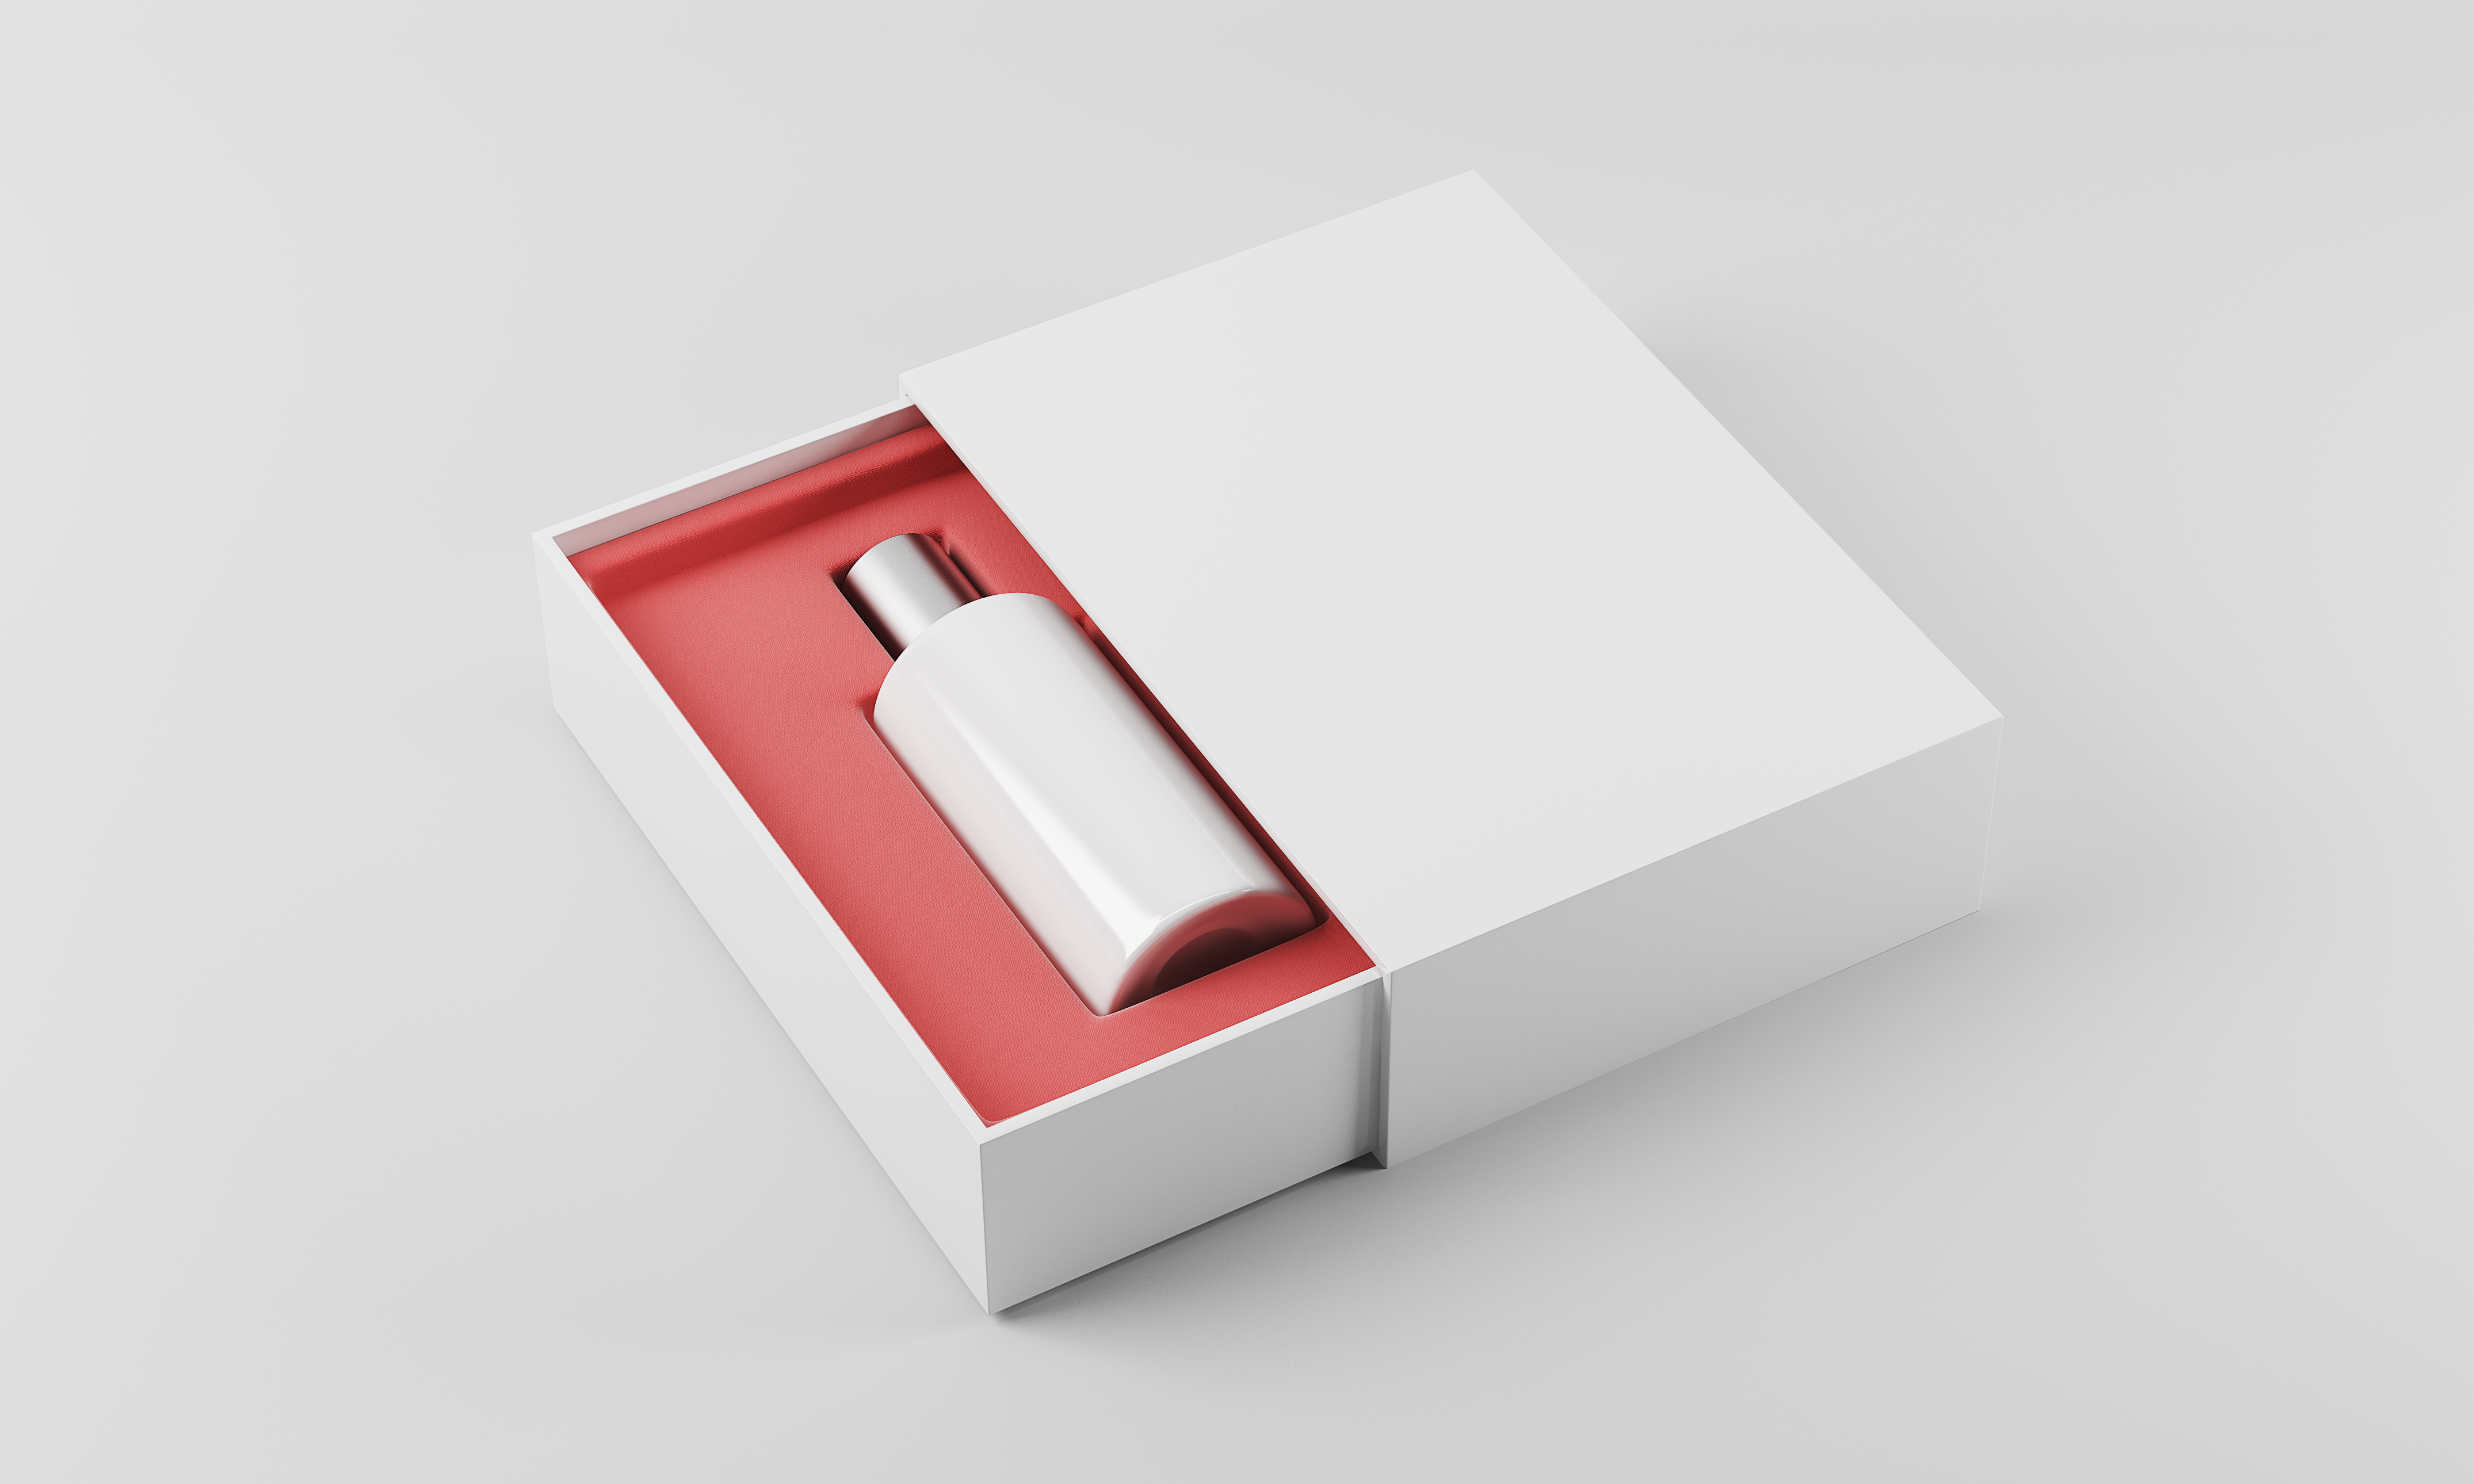 Reflect Your Products' Personalities in Your Boxes